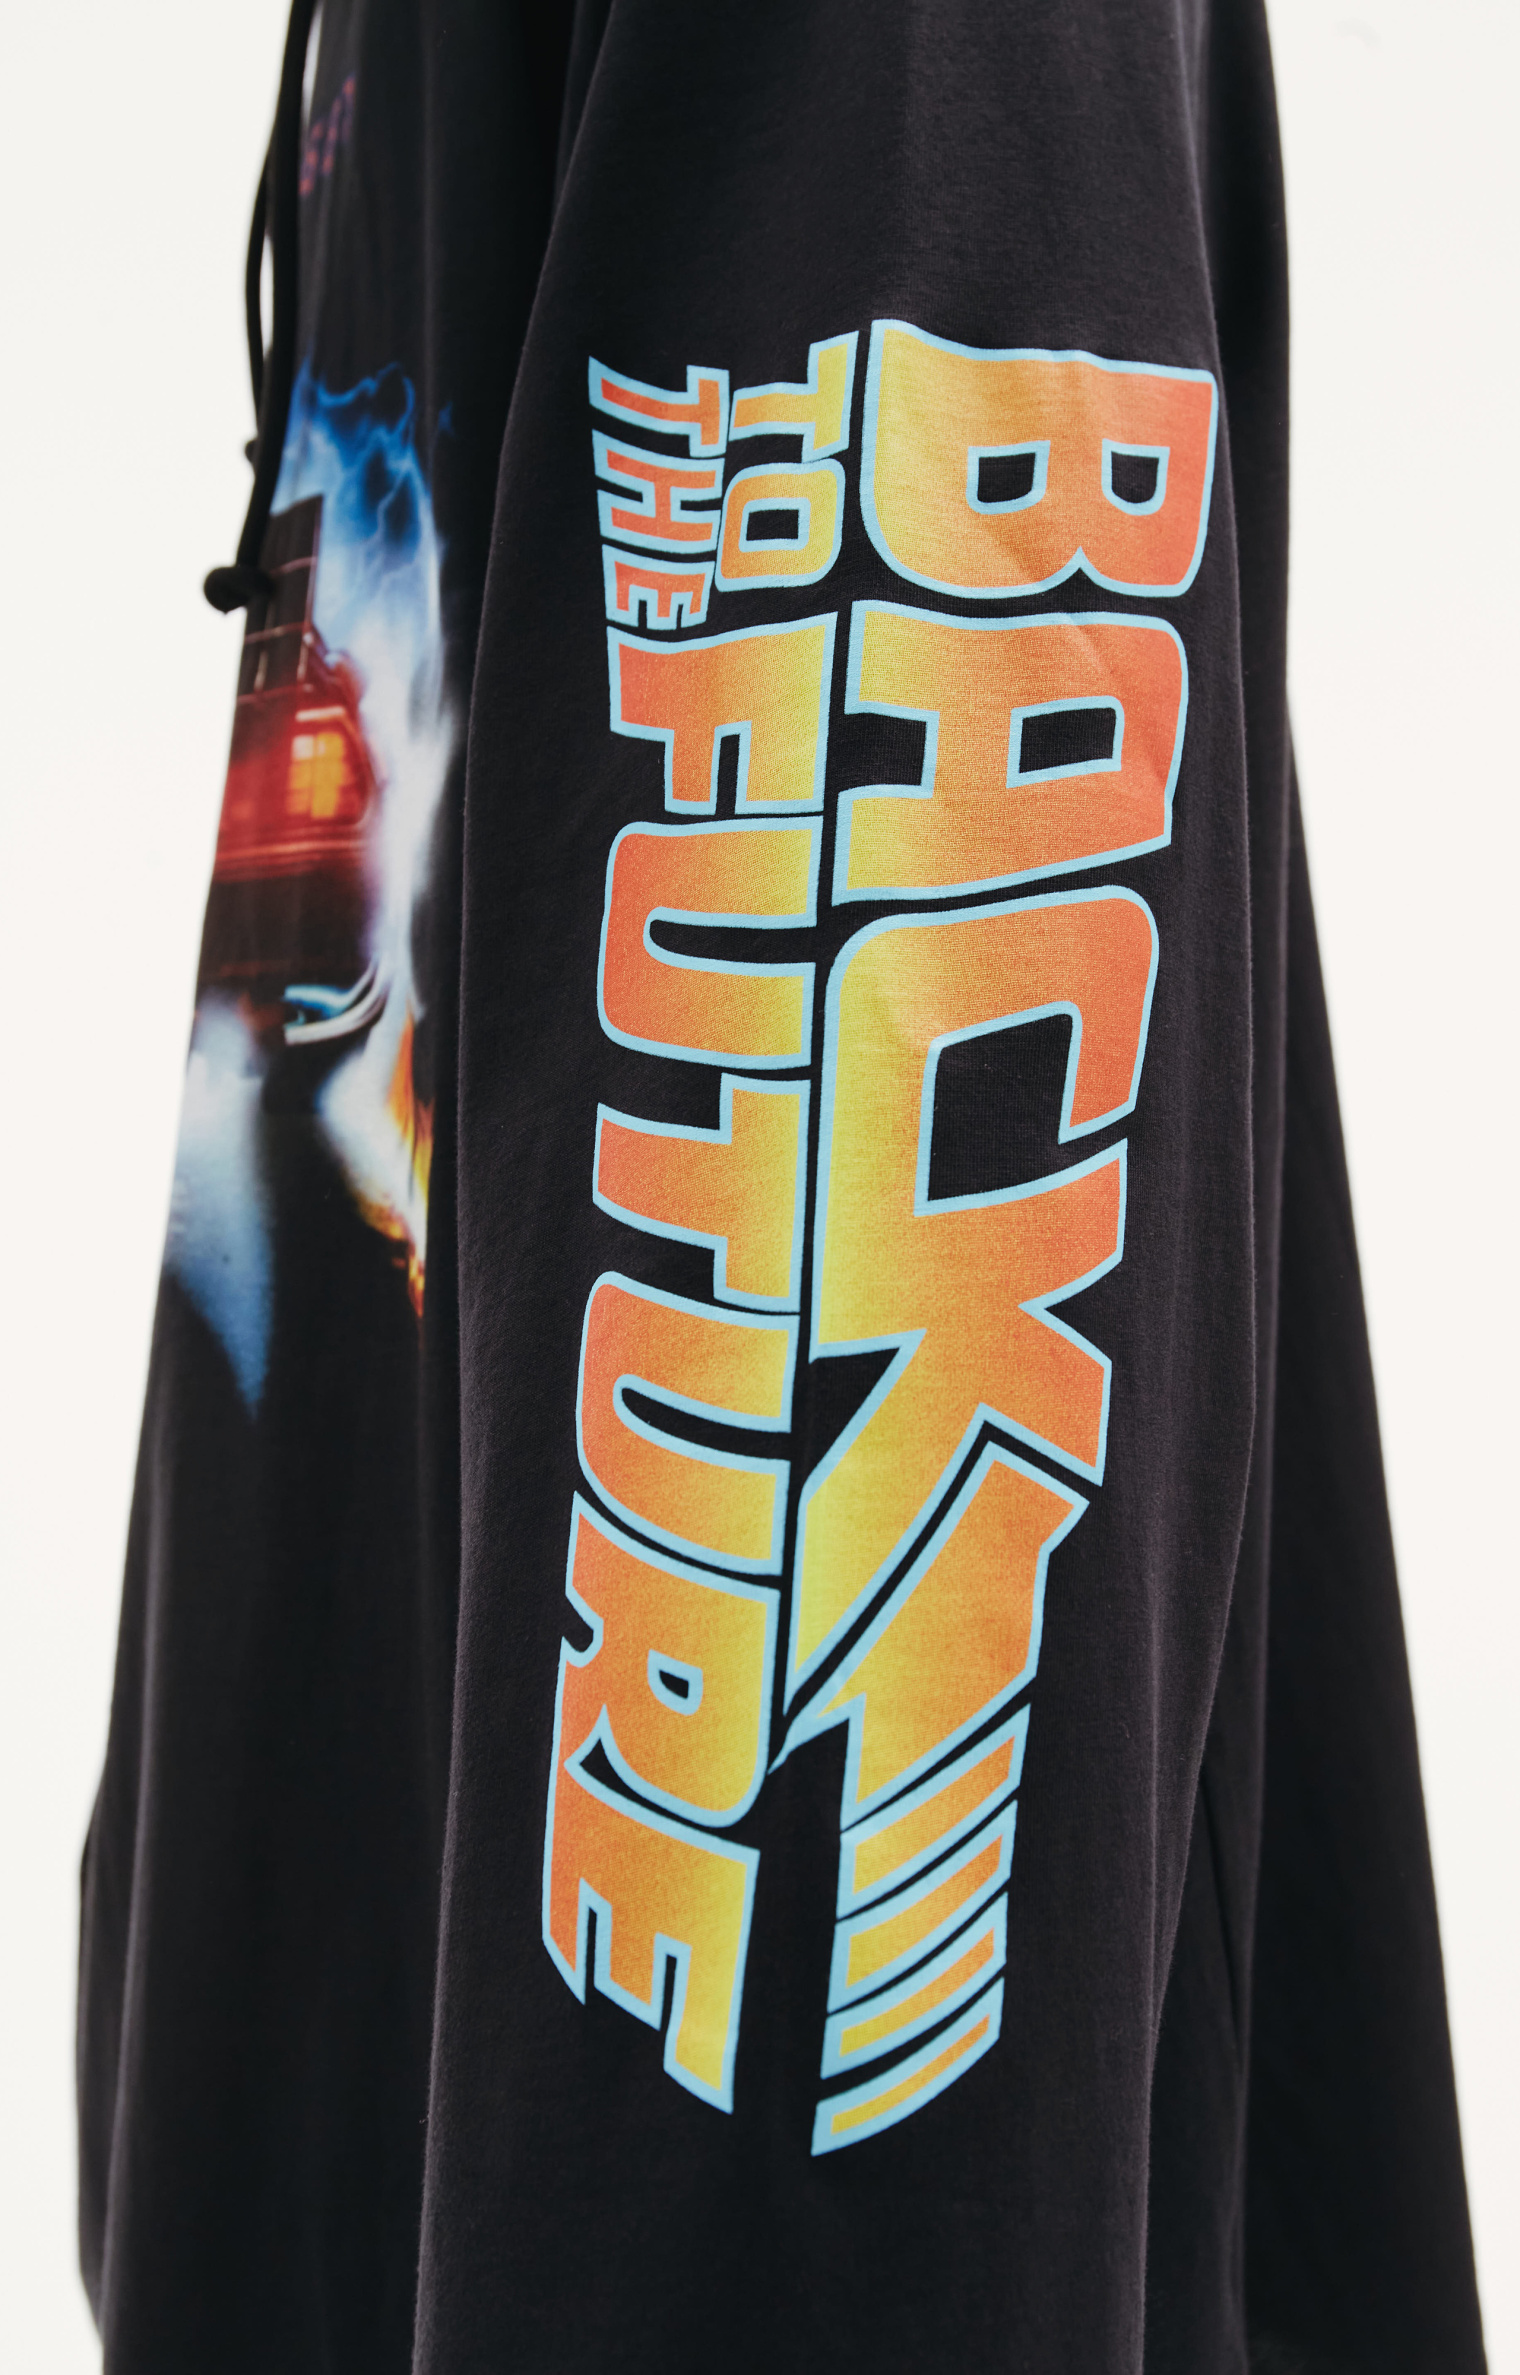 VTMNTS Back to the future printed hoodie